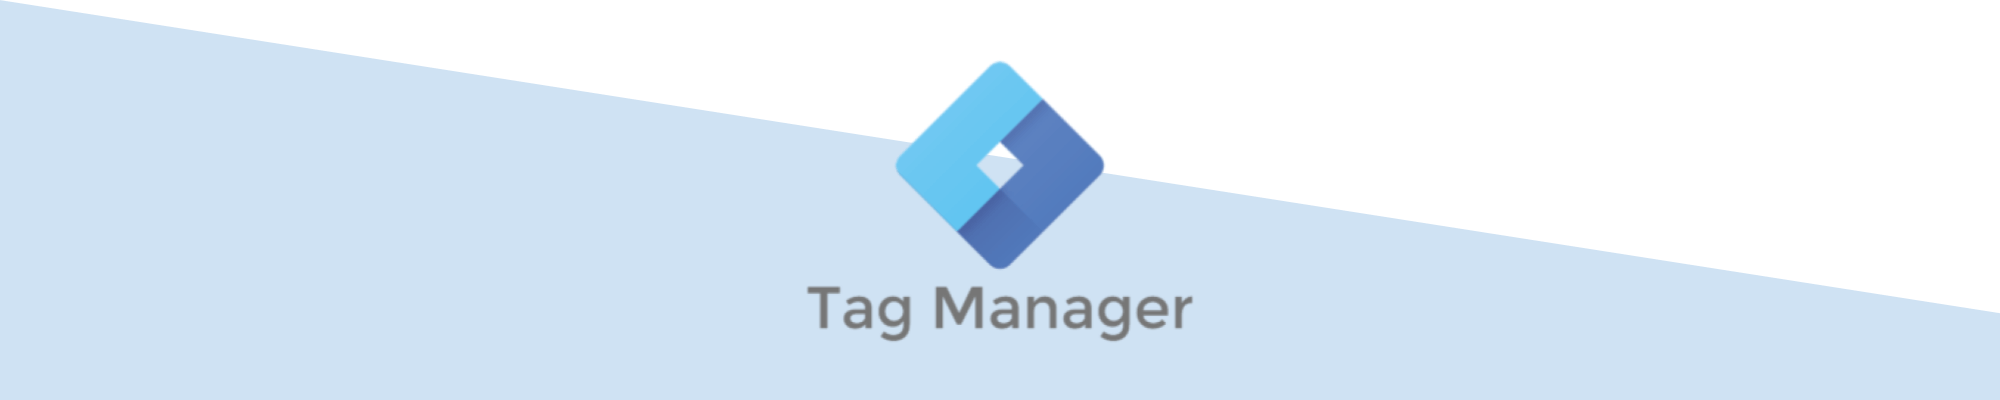 Google Tag Manager.